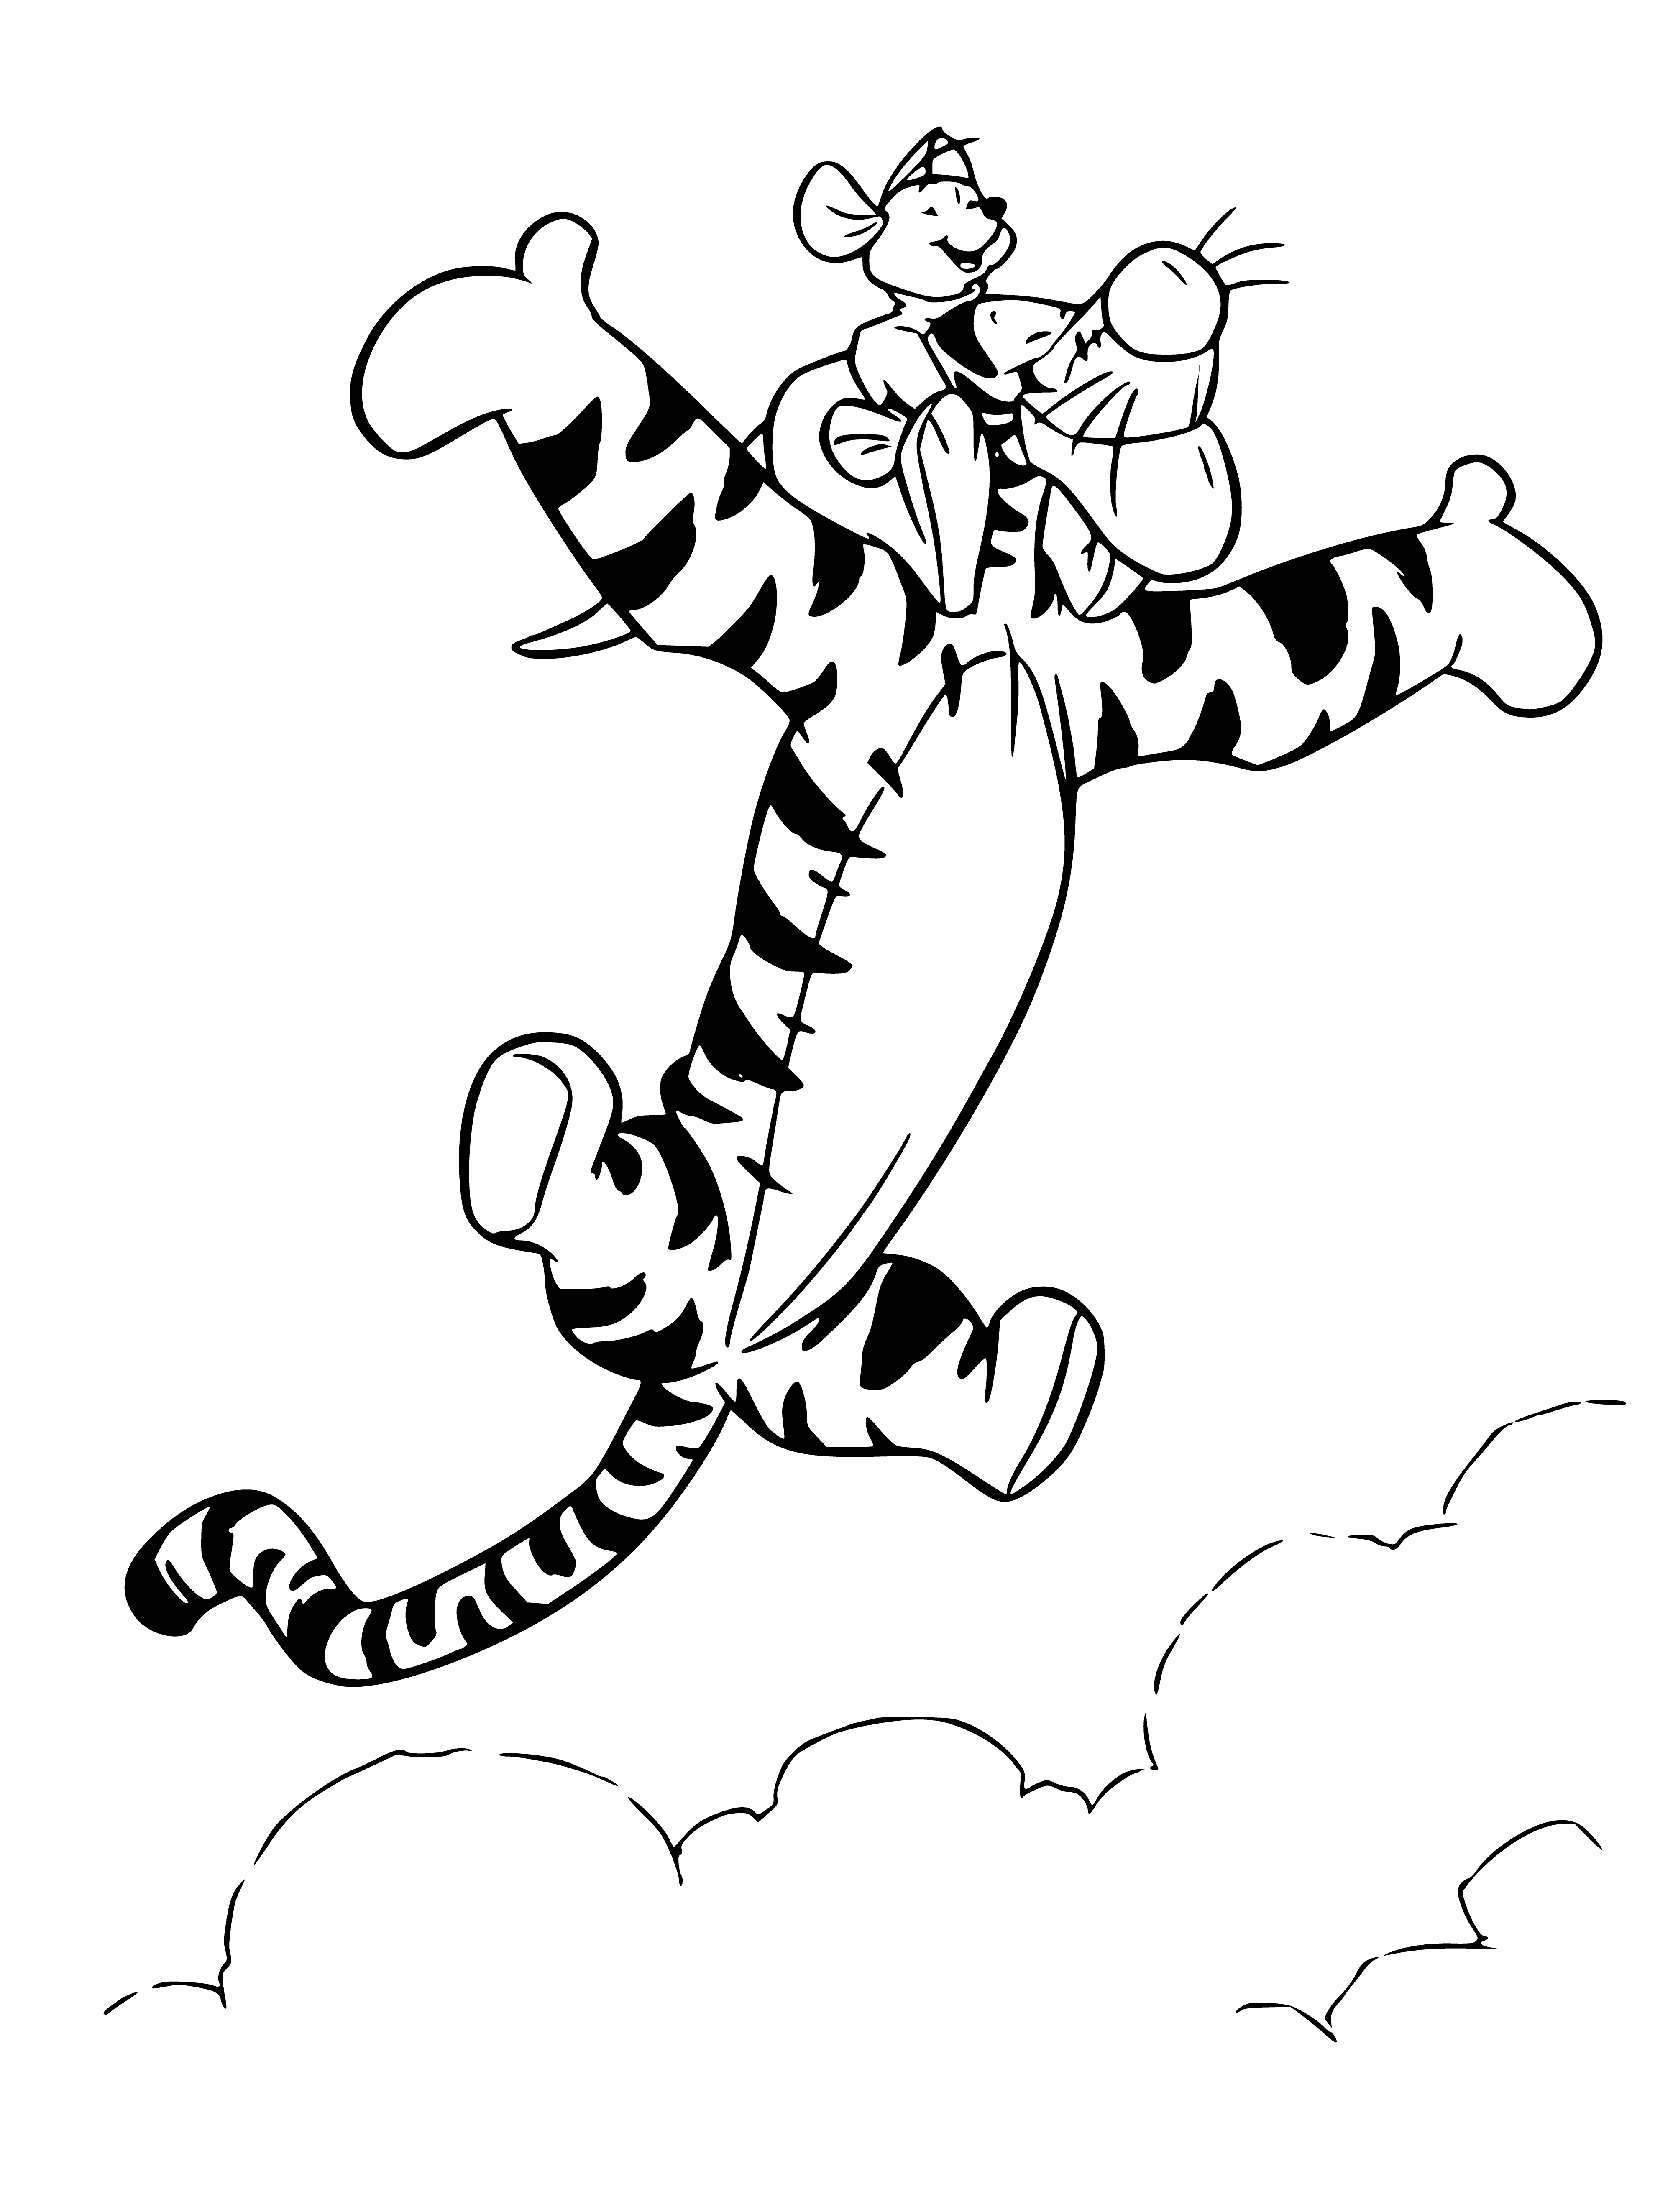 coloring page: Winnie & Tigger sit on a log together, smiling. Trees & flowers surround them, creating a peaceful scene. #Disney #Pooh #Tigger